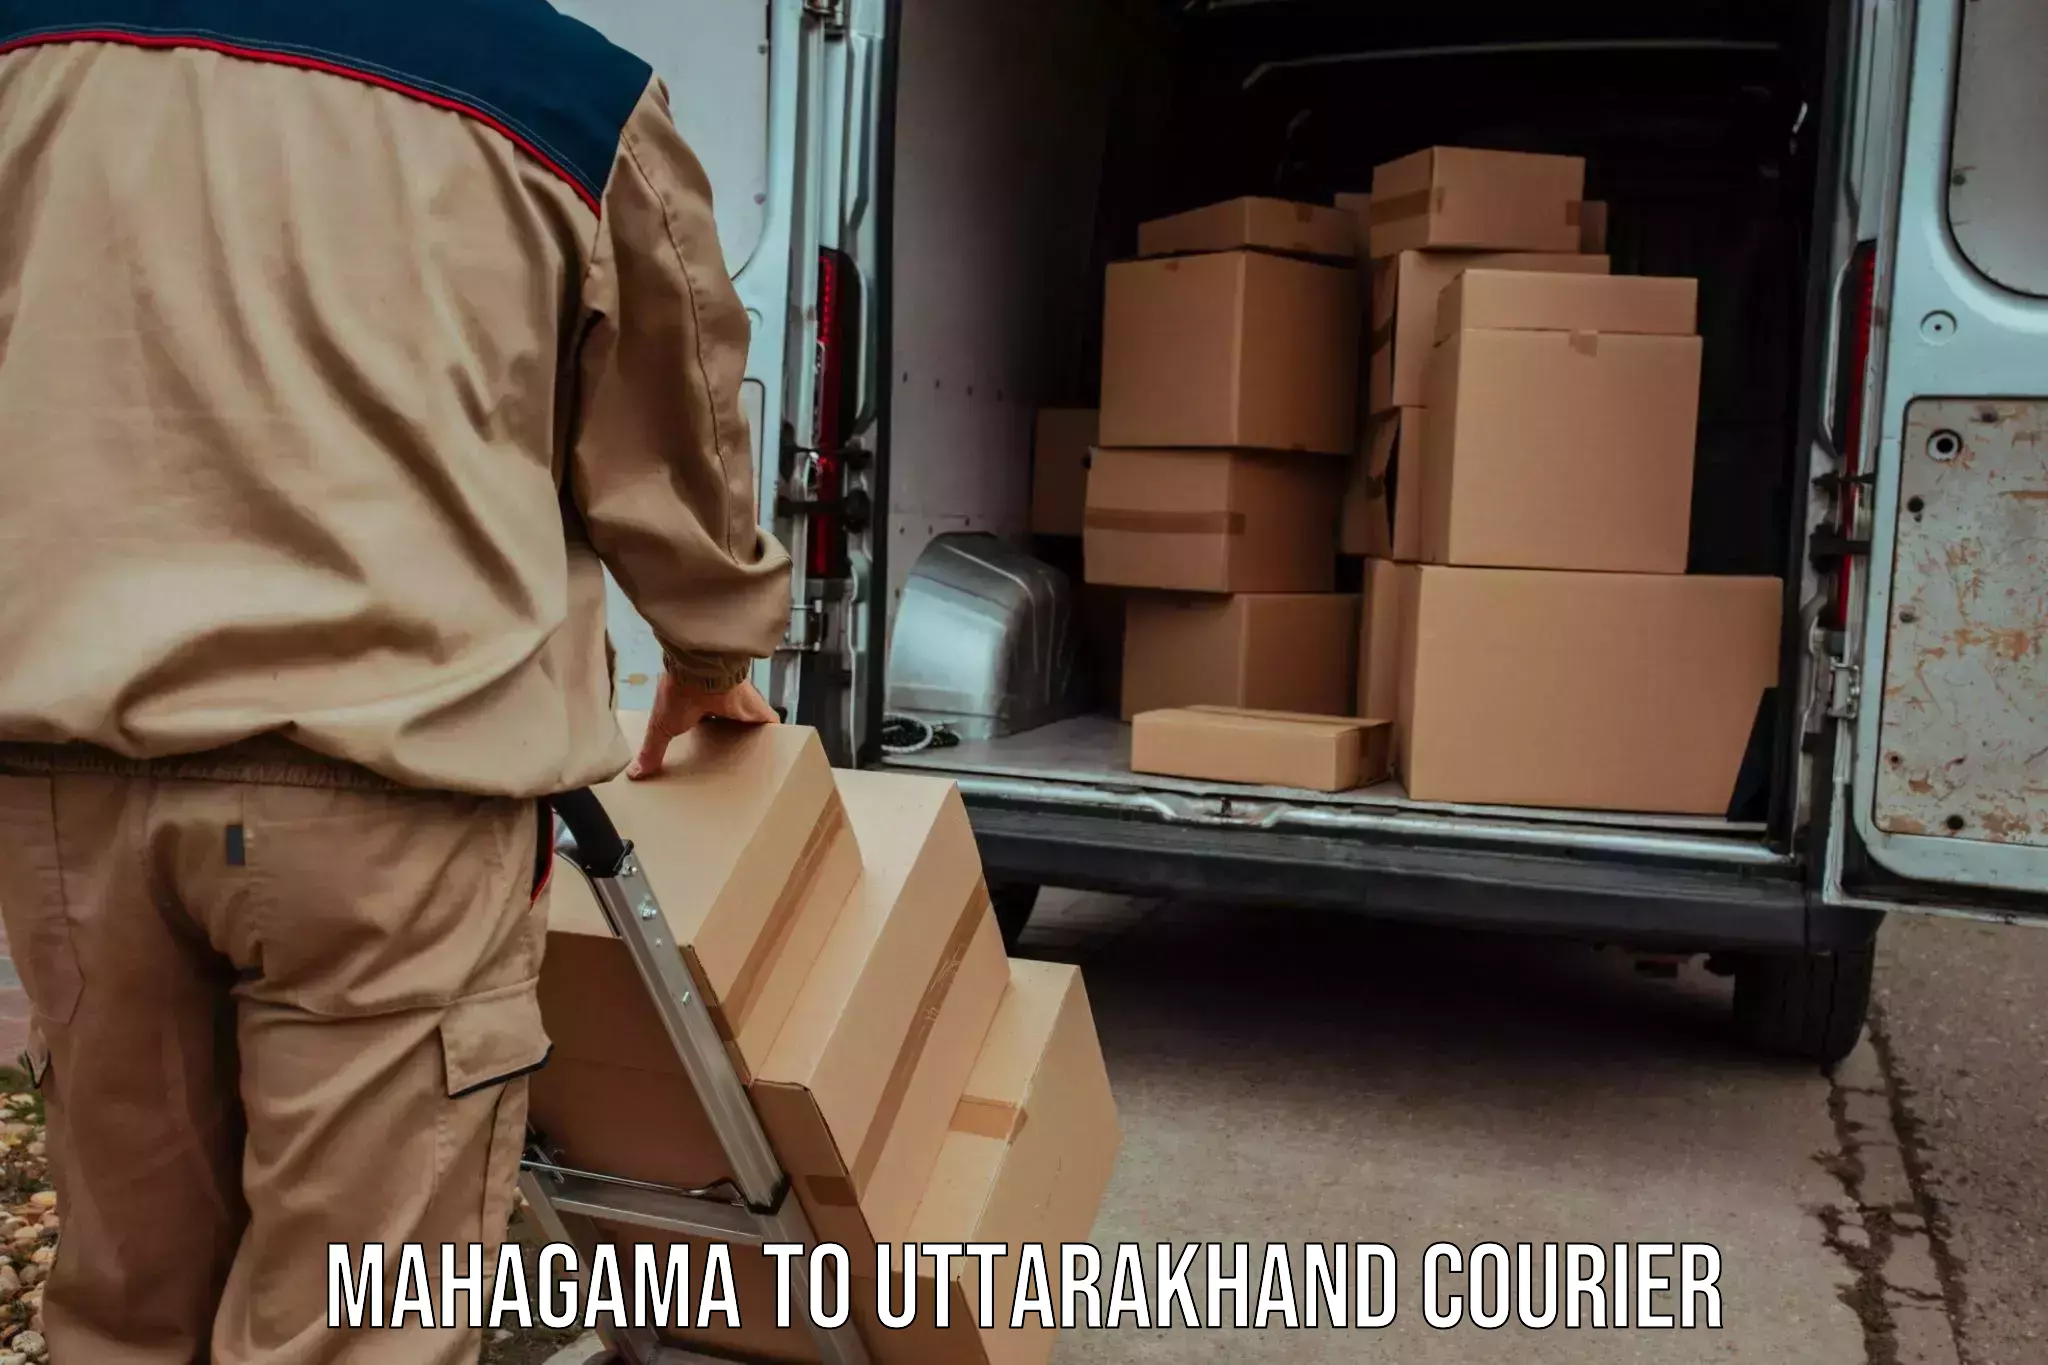 State-of-the-art courier technology Mahagama to Paithani